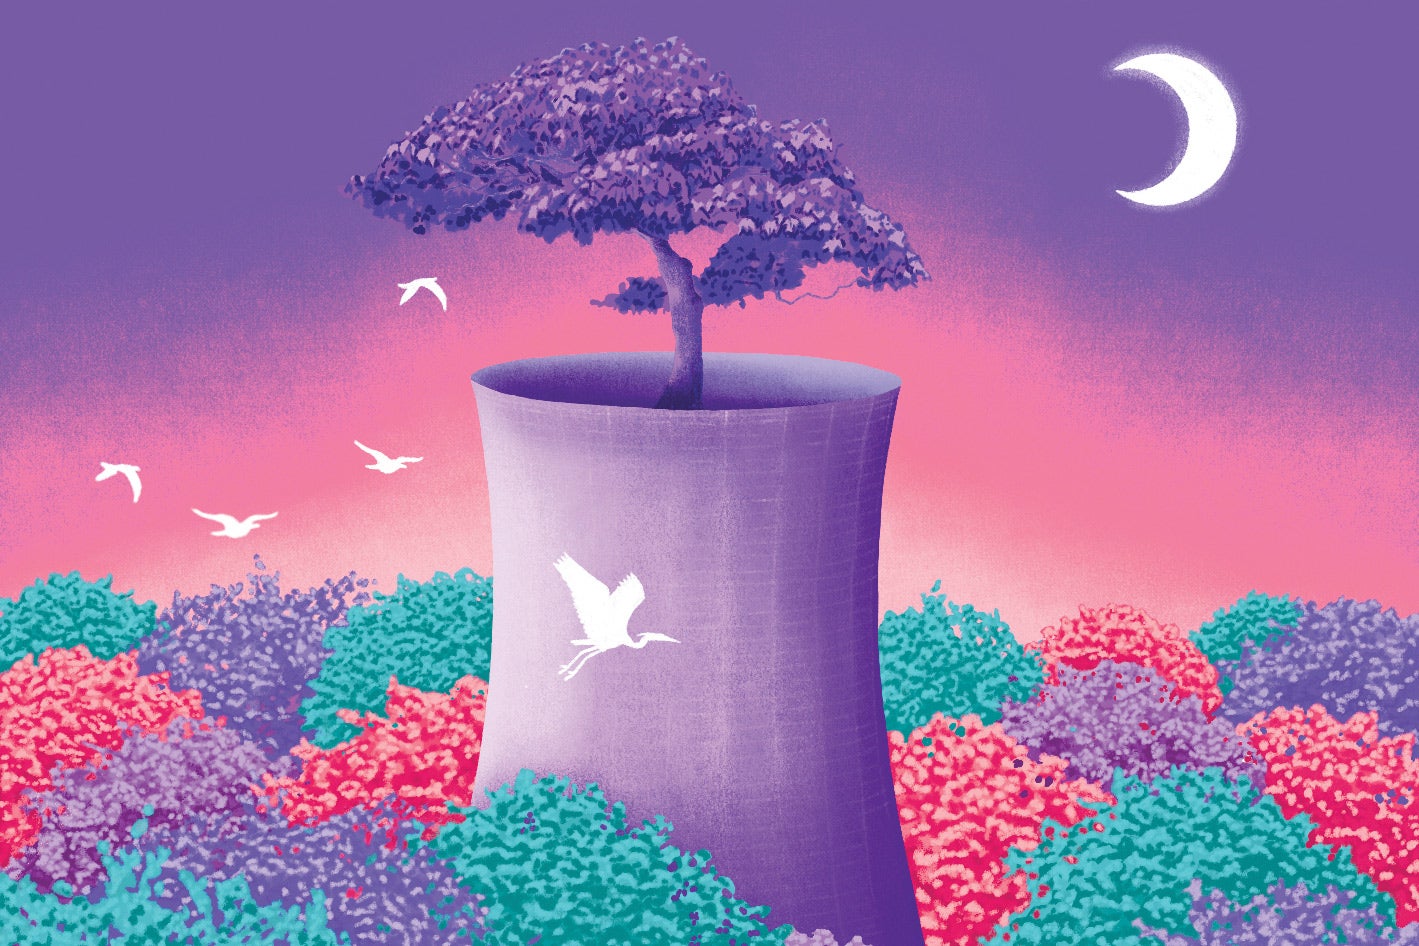 White birds on a pink, purple, and green illustration of the Fukushima nuclear plant